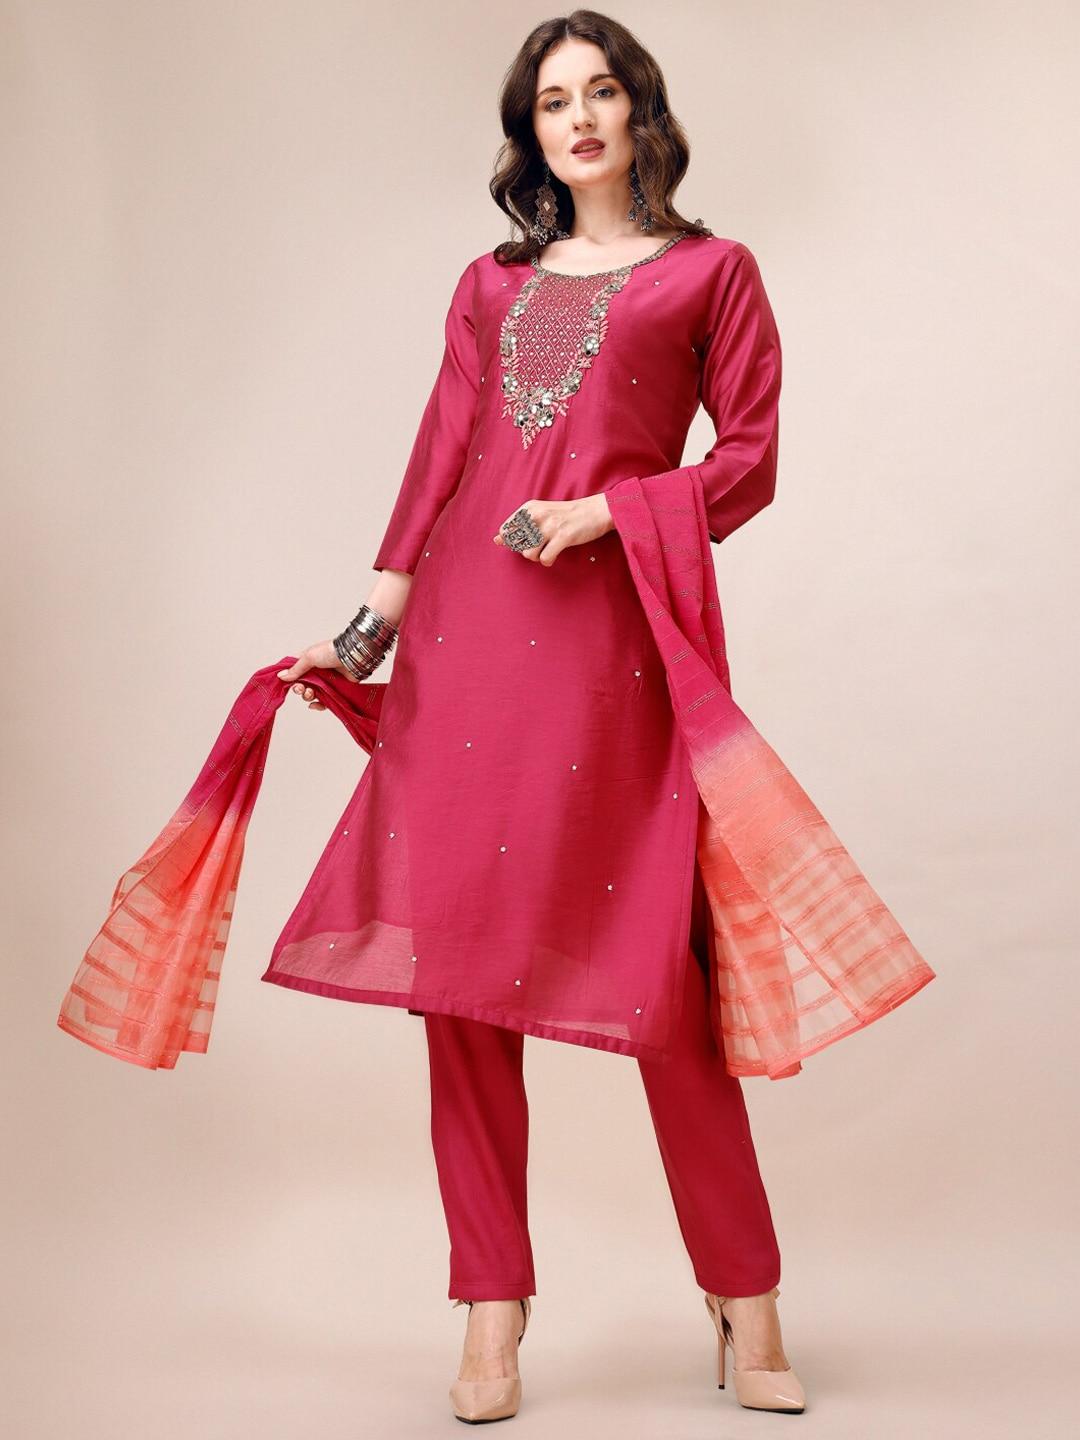 Berrylicious Embroidered Beads and Stones Chanderi Cotton Kurta & Trousers With Dupatta